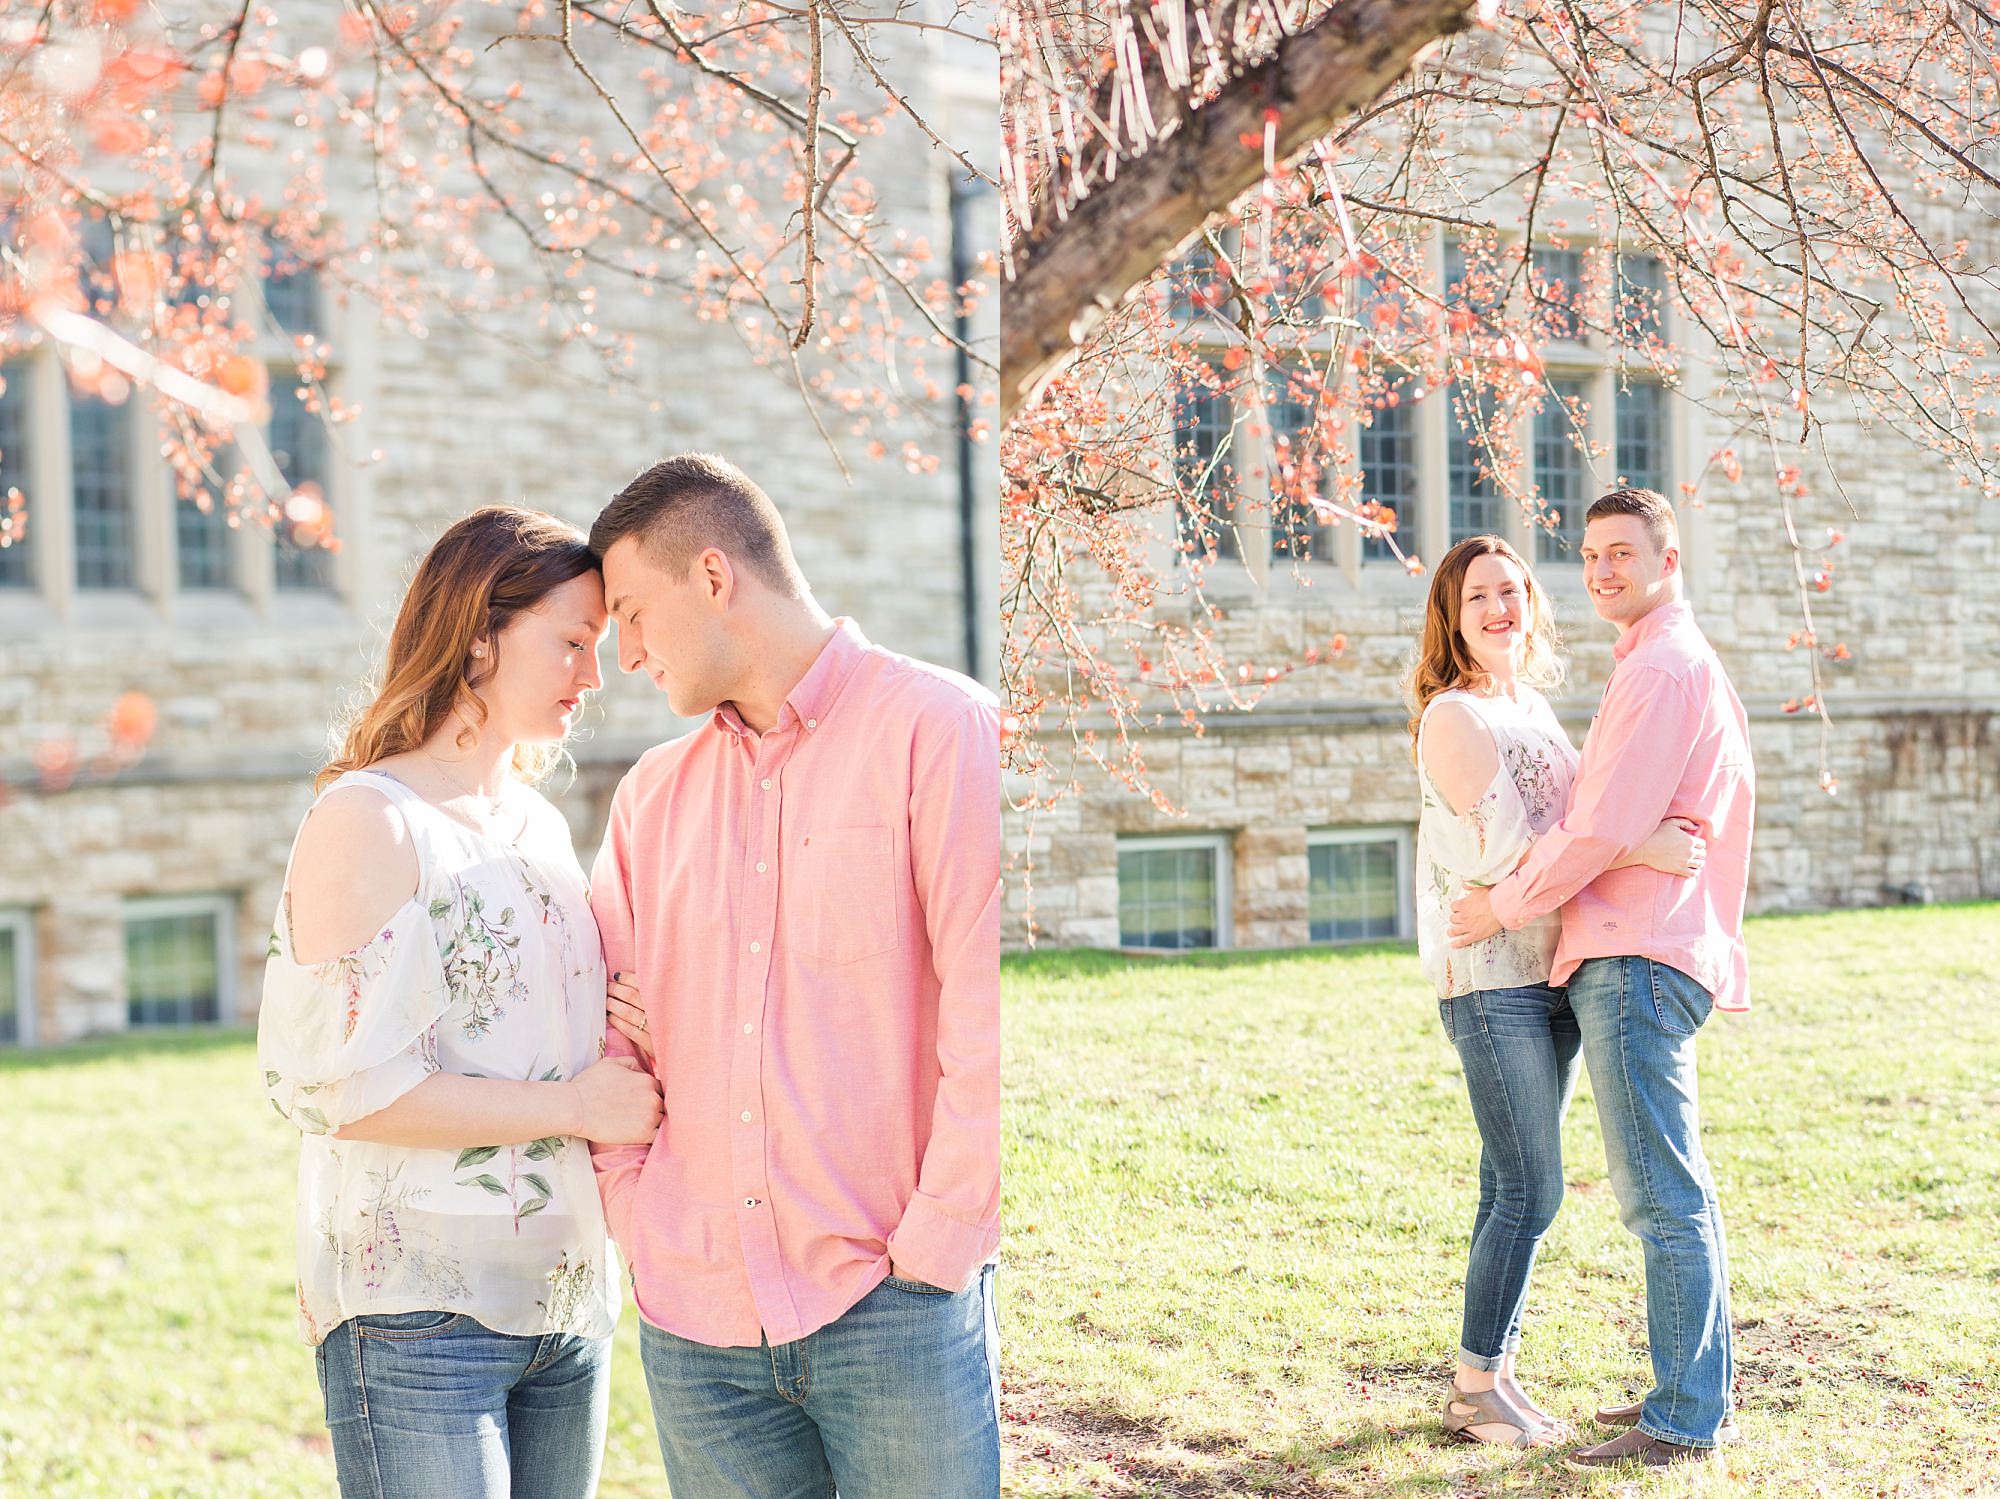 An engaged couple in shades of pink enjoy the spring blossoms outside a Downtown Fargo church